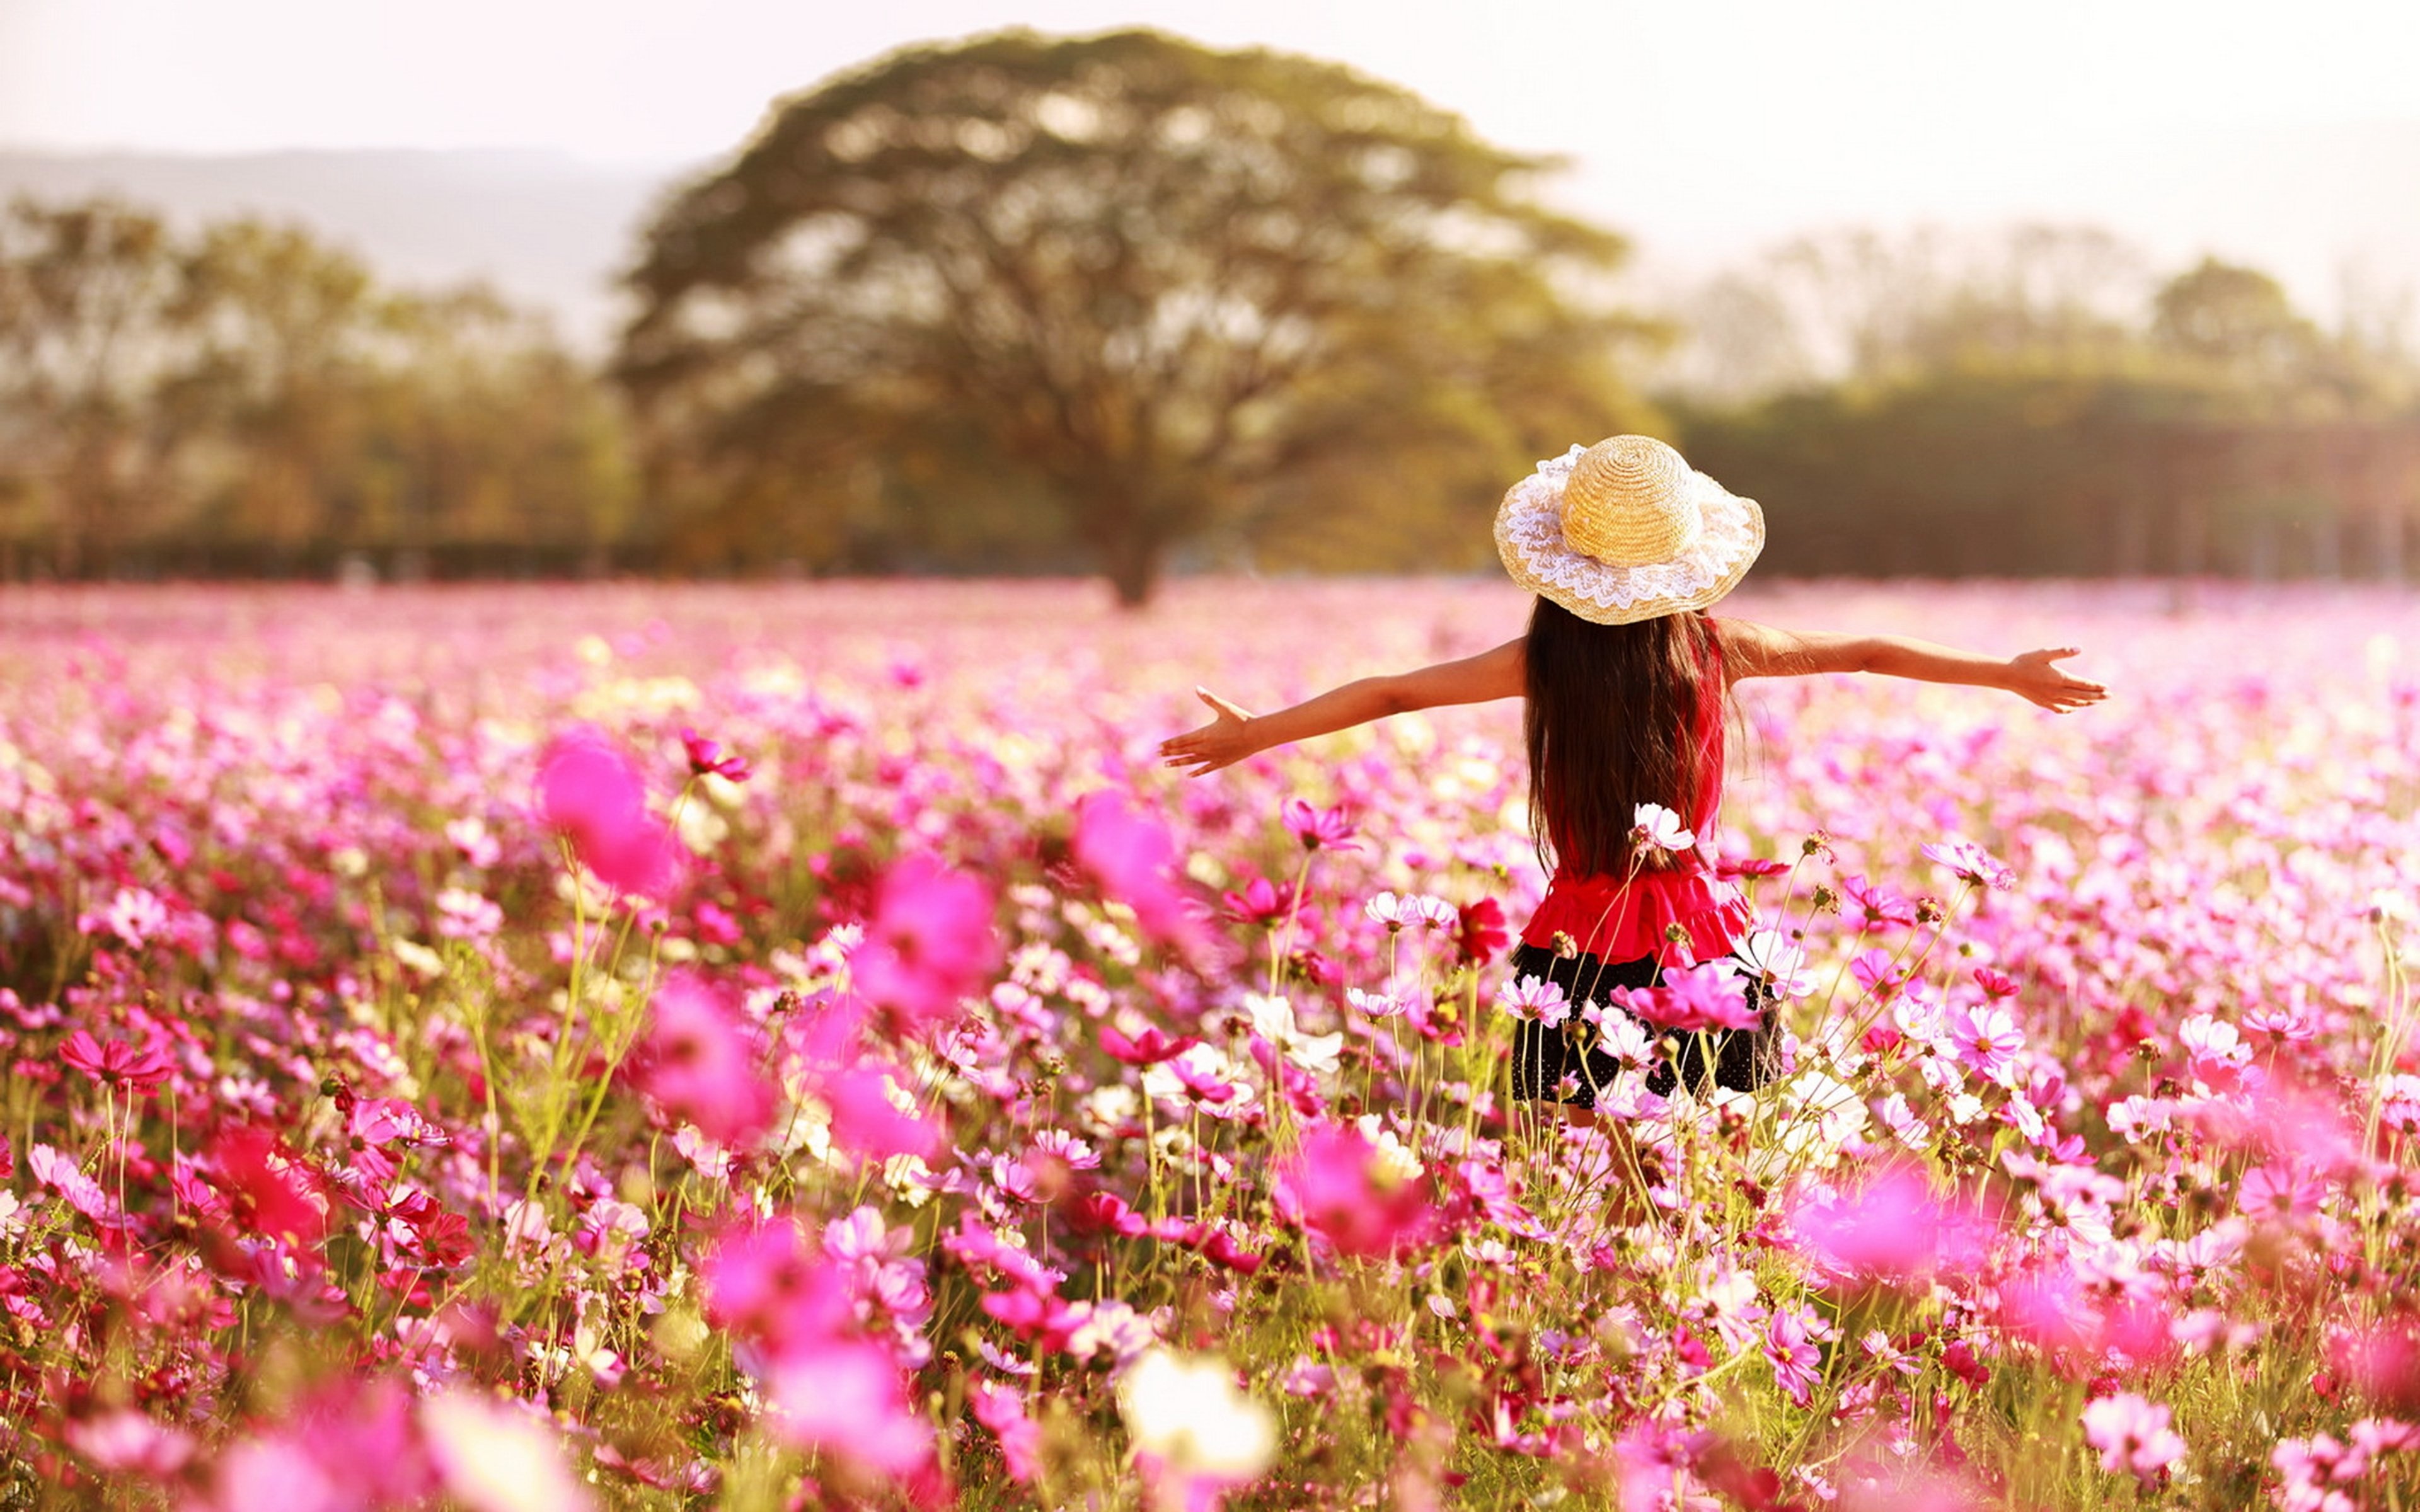 kids, Children, Childhood, Girls, Joy, Happy, Spring, Nature, Landscapes, Earth, Flowers, Pink, Rose, Trees, Countryside, Fun, Life Wallpaper